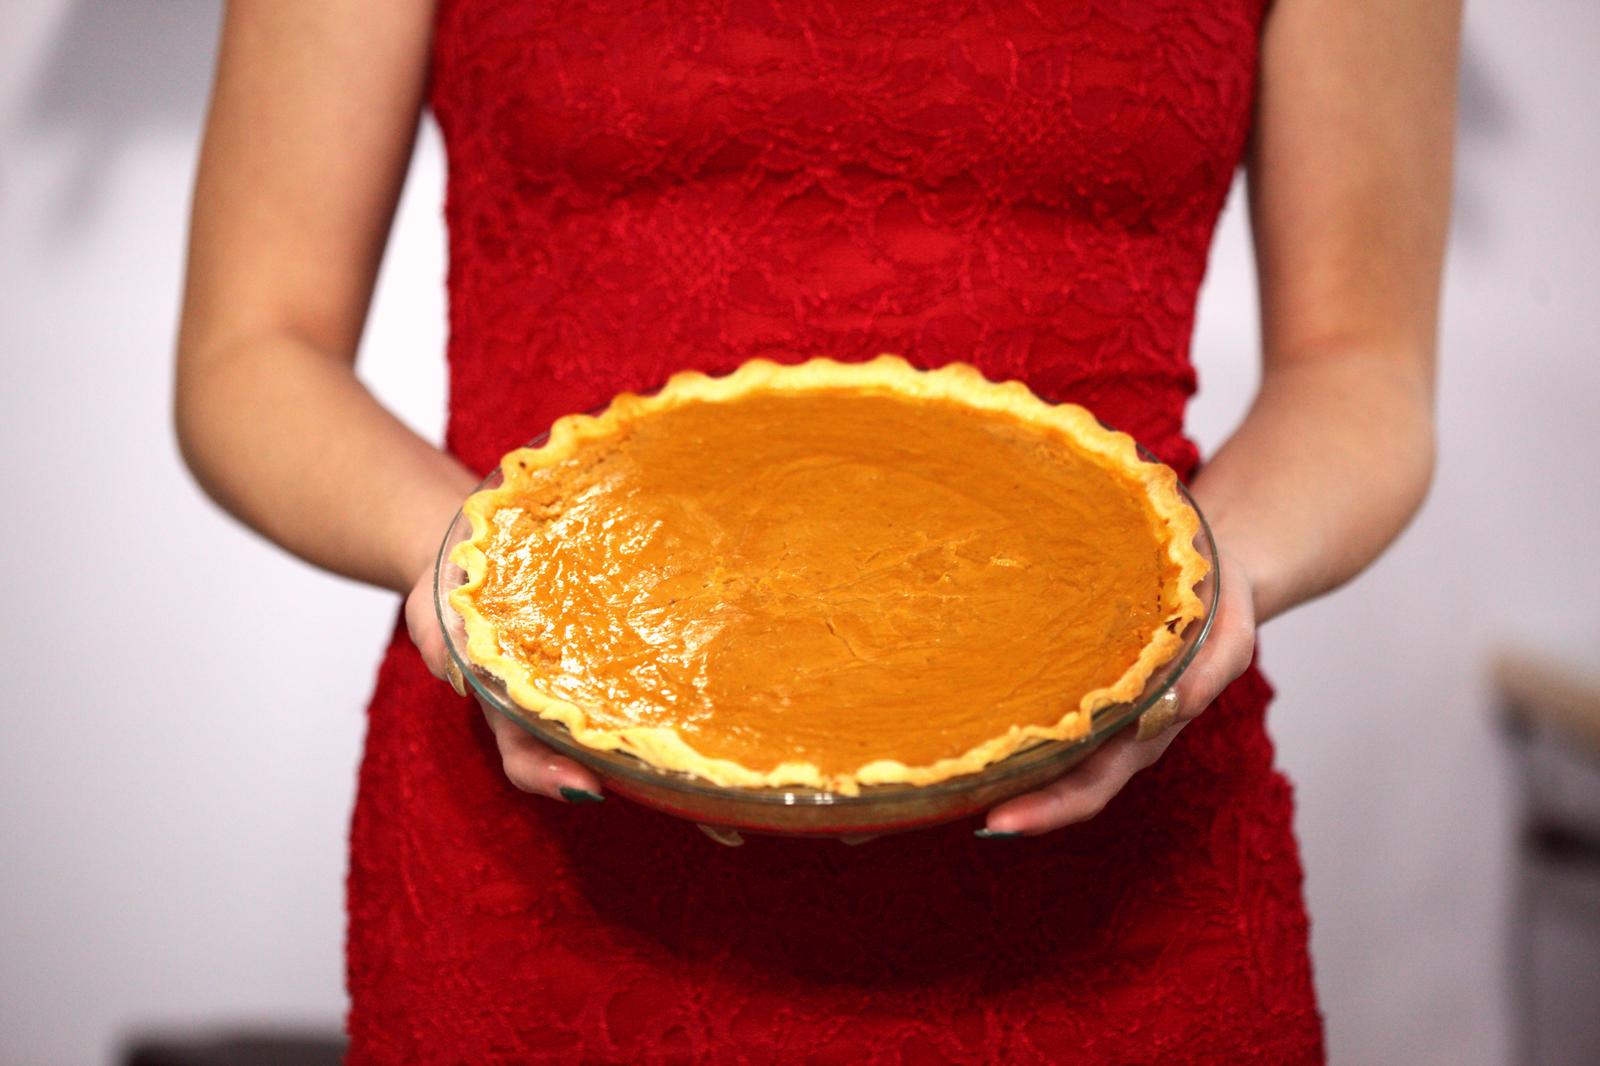 Eat Mega Meal to Know Vacation Spot You'd Feel Most at … Quiz Pumpkin pie